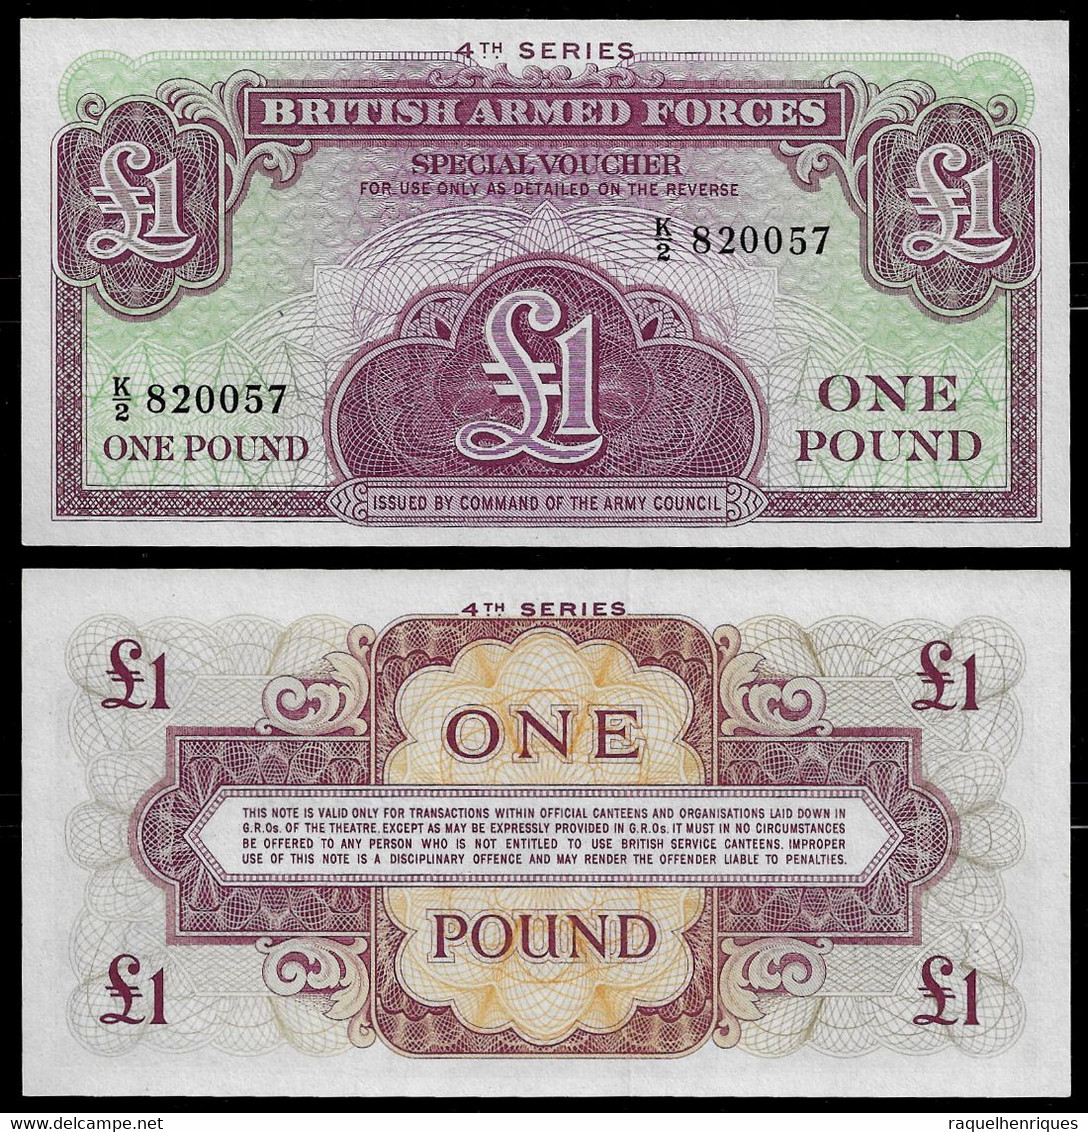 UNITED KINGDOM - GREAT BRITAIN - BRITISH ARMED FORCES BANKNOTE - 1 POUND 4th SERIES 1962 P#M36a UNC (NT#04) - British Armed Forces & Special Vouchers